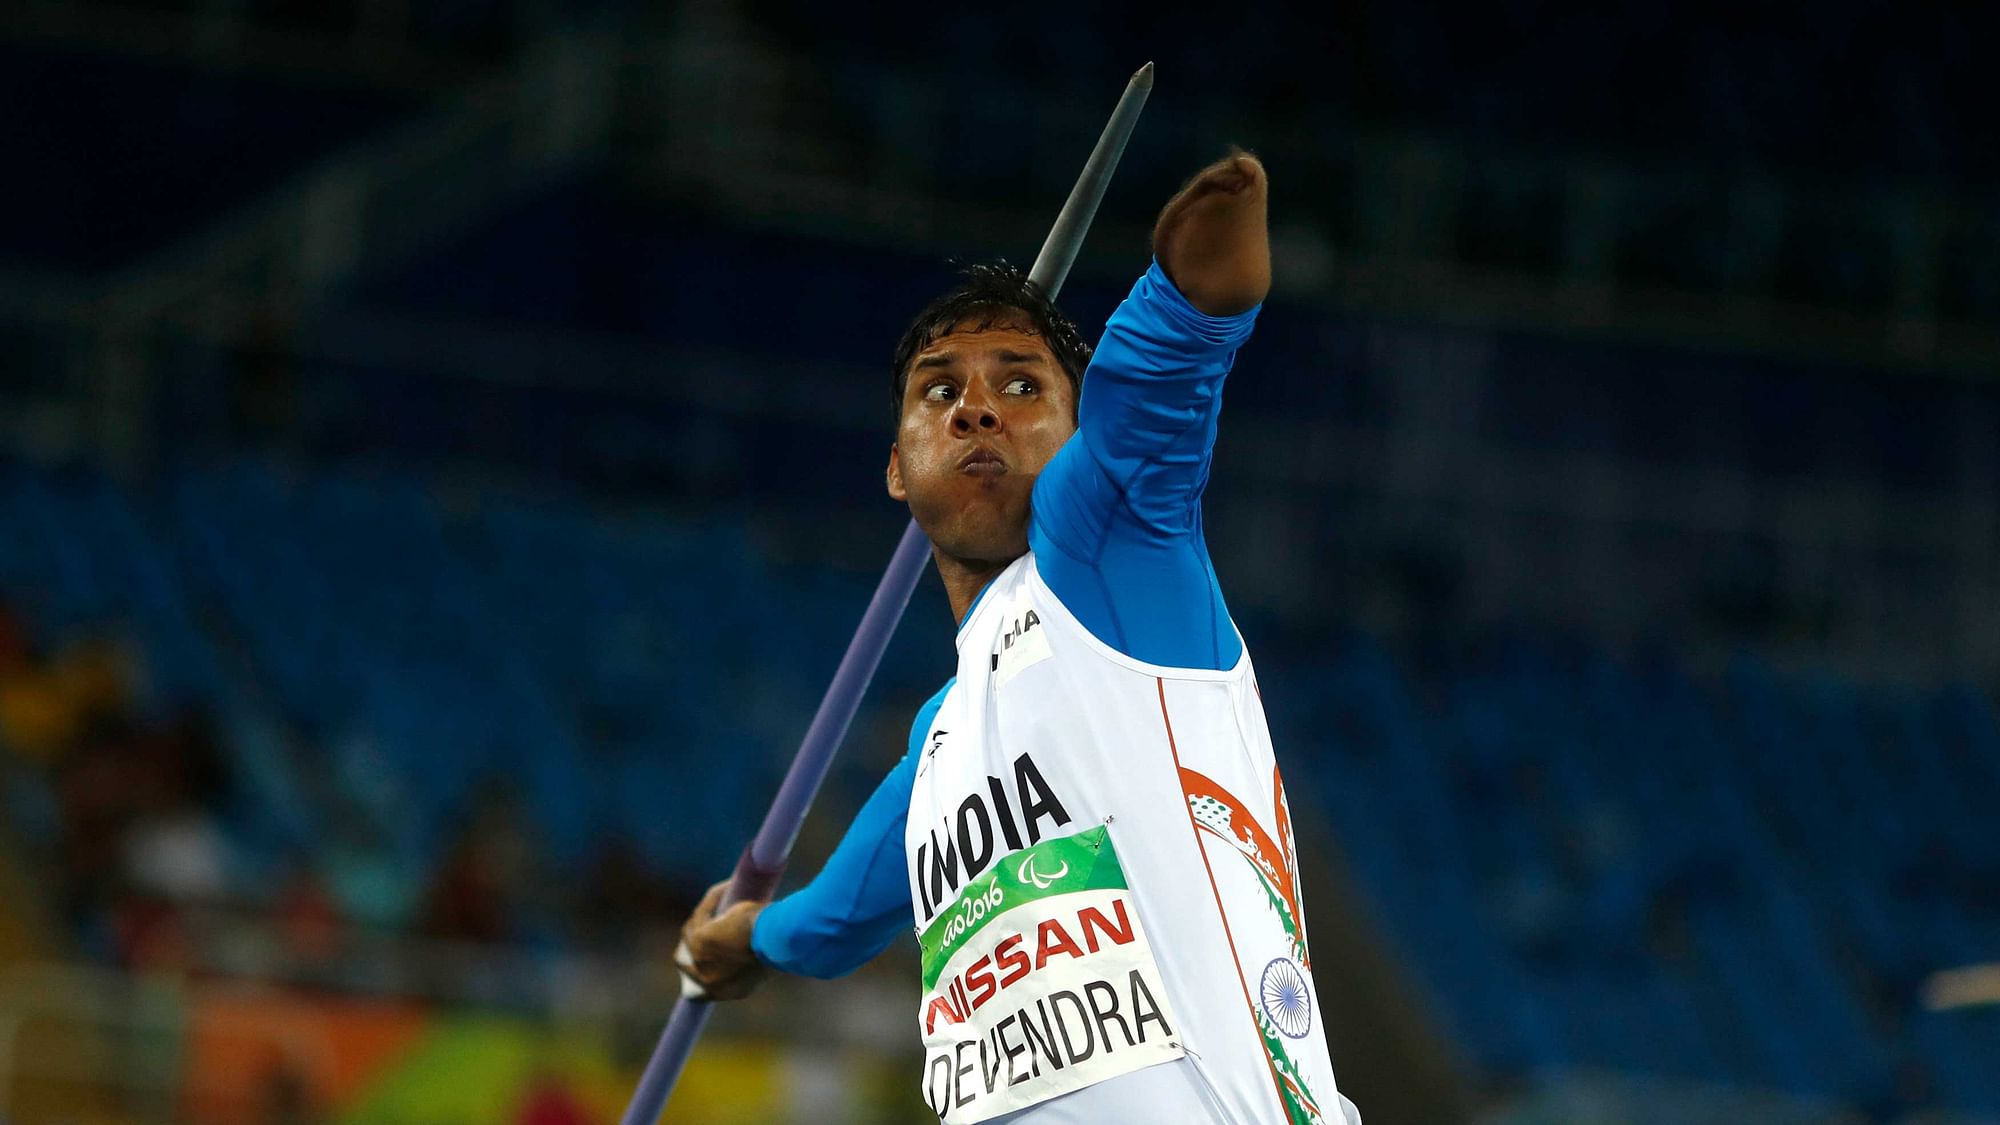 Devendra Jhajharia won a gold medal at the Rio Olympics in javelin throw.